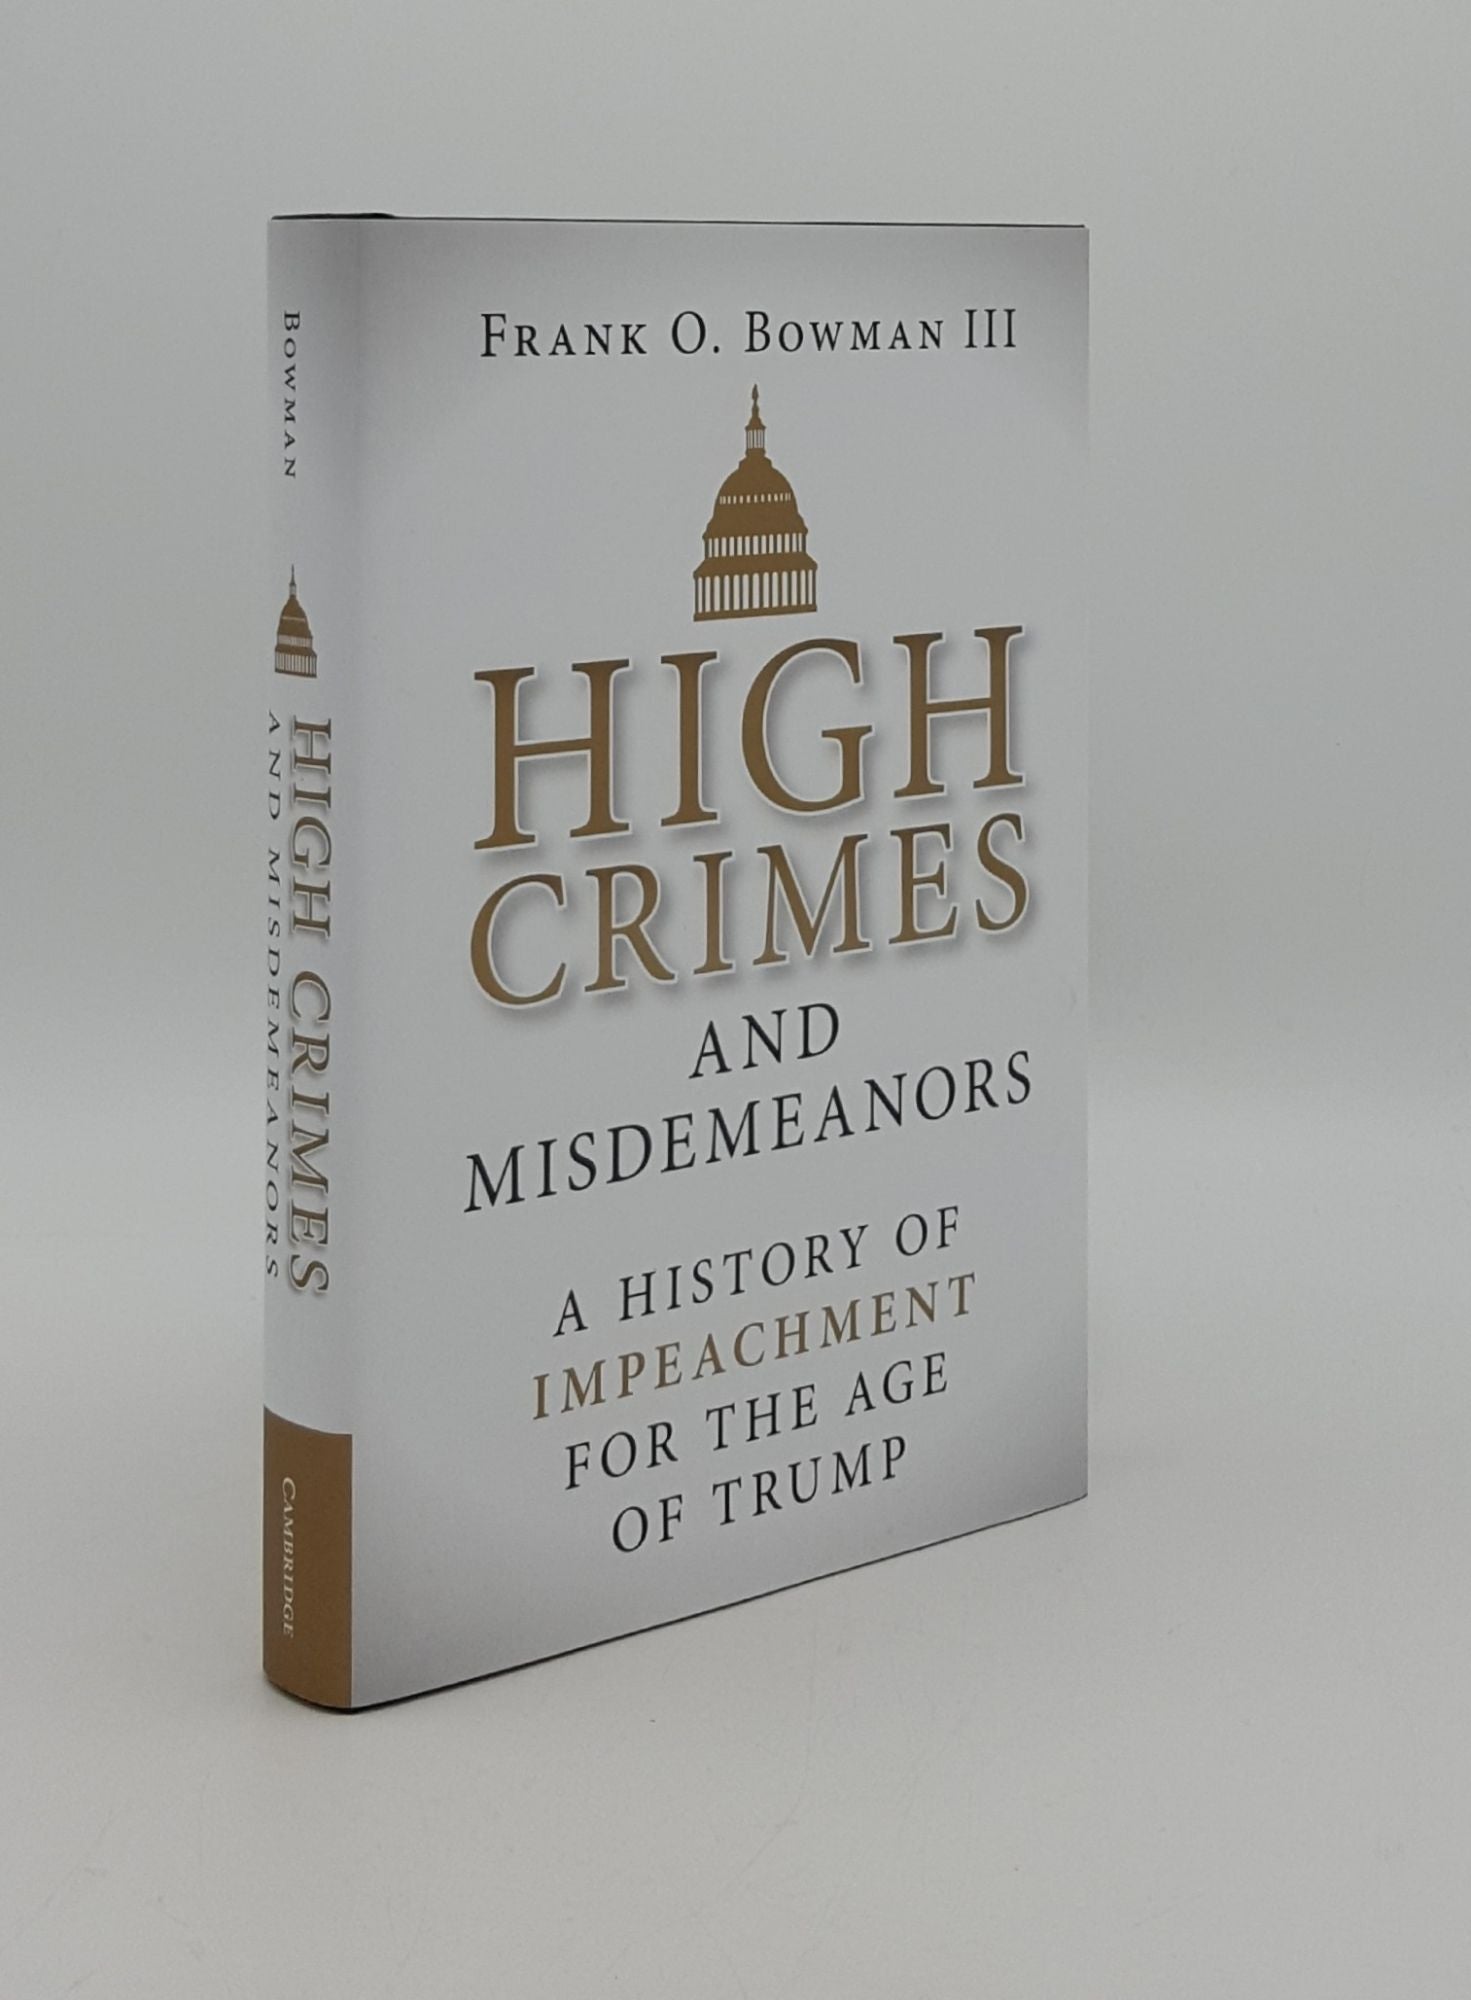 BOWMAN Frank O. III - High Crimes and Misdemeanors a History of Impeachment for the Age of Trump